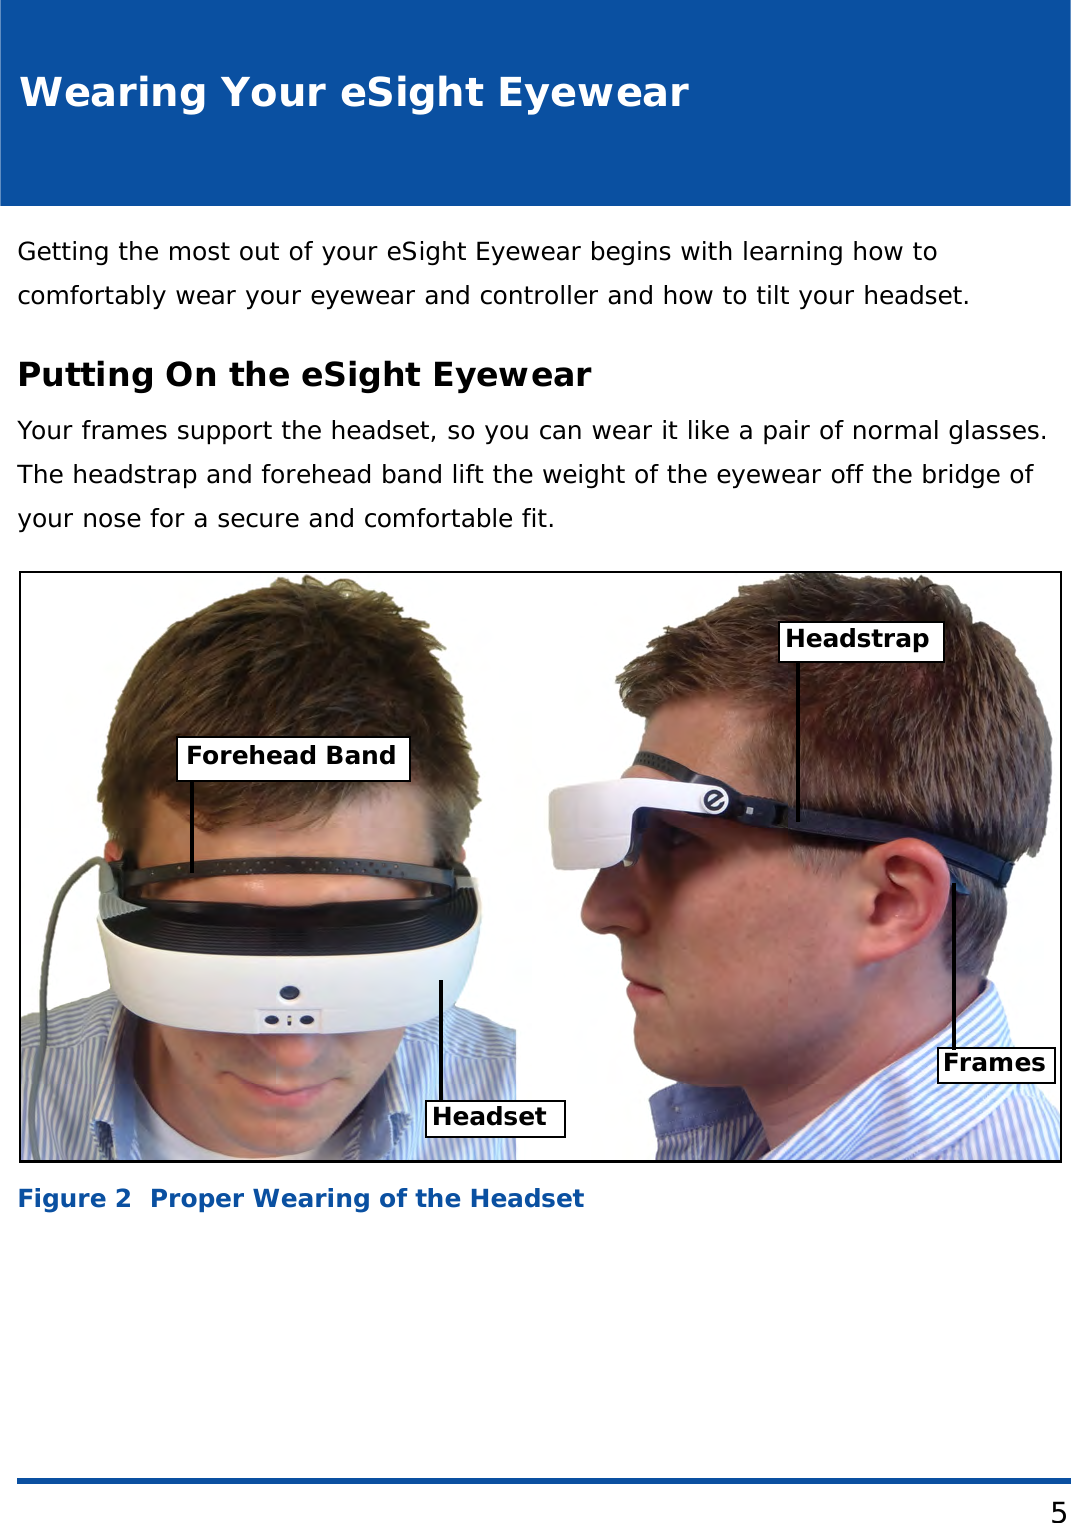 5Wearing Your eSight EyewearGetting the most out of your eSight Eyewear begins with learning how to comfortably wear your eyewear and controller and how to tilt your headset.Putting On the eSight EyewearYour frames support the headset, so you can wear it like a pair of normal glasses. The headstrap and forehead band lift the weight of the eyewear off the bridge of your nose for a secure and comfortable fit. Figure 2  Proper Wearing of the HeadsetHeadstrapHeadsetForehead BandFrames